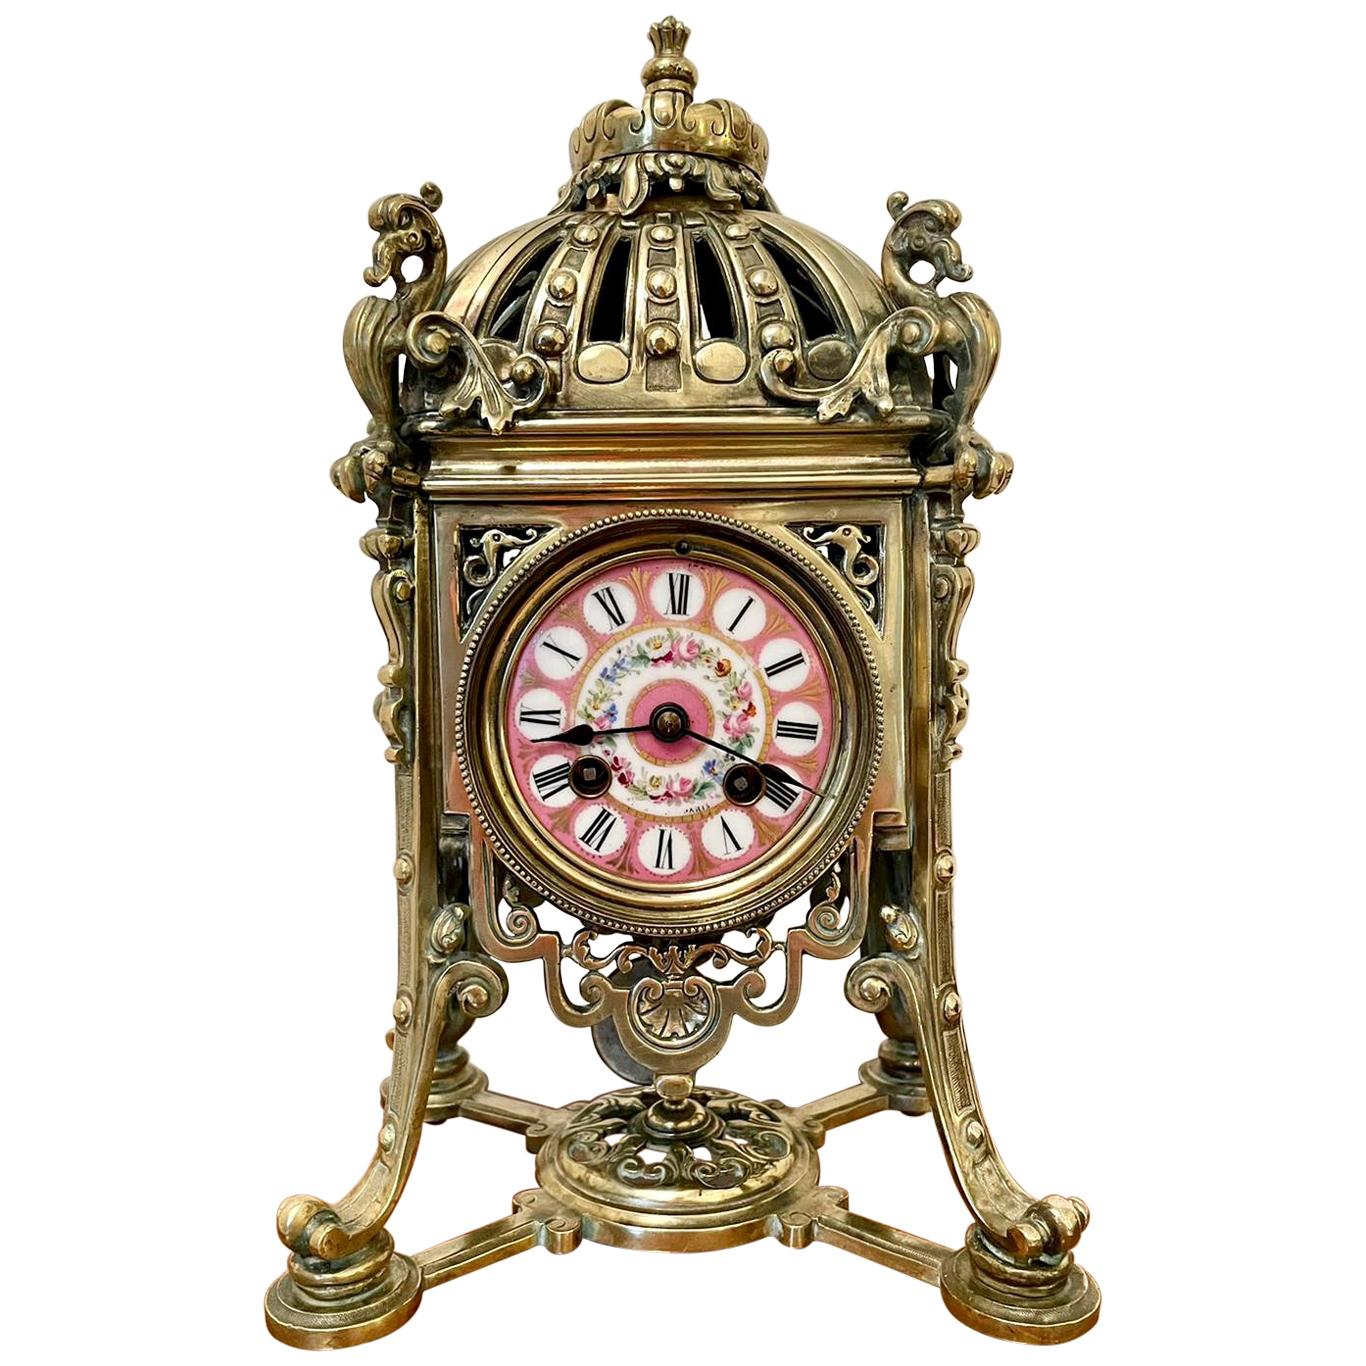 Antique French Brass Gilt Striking Mantel Clock by Henry Marcs & Japy Freres